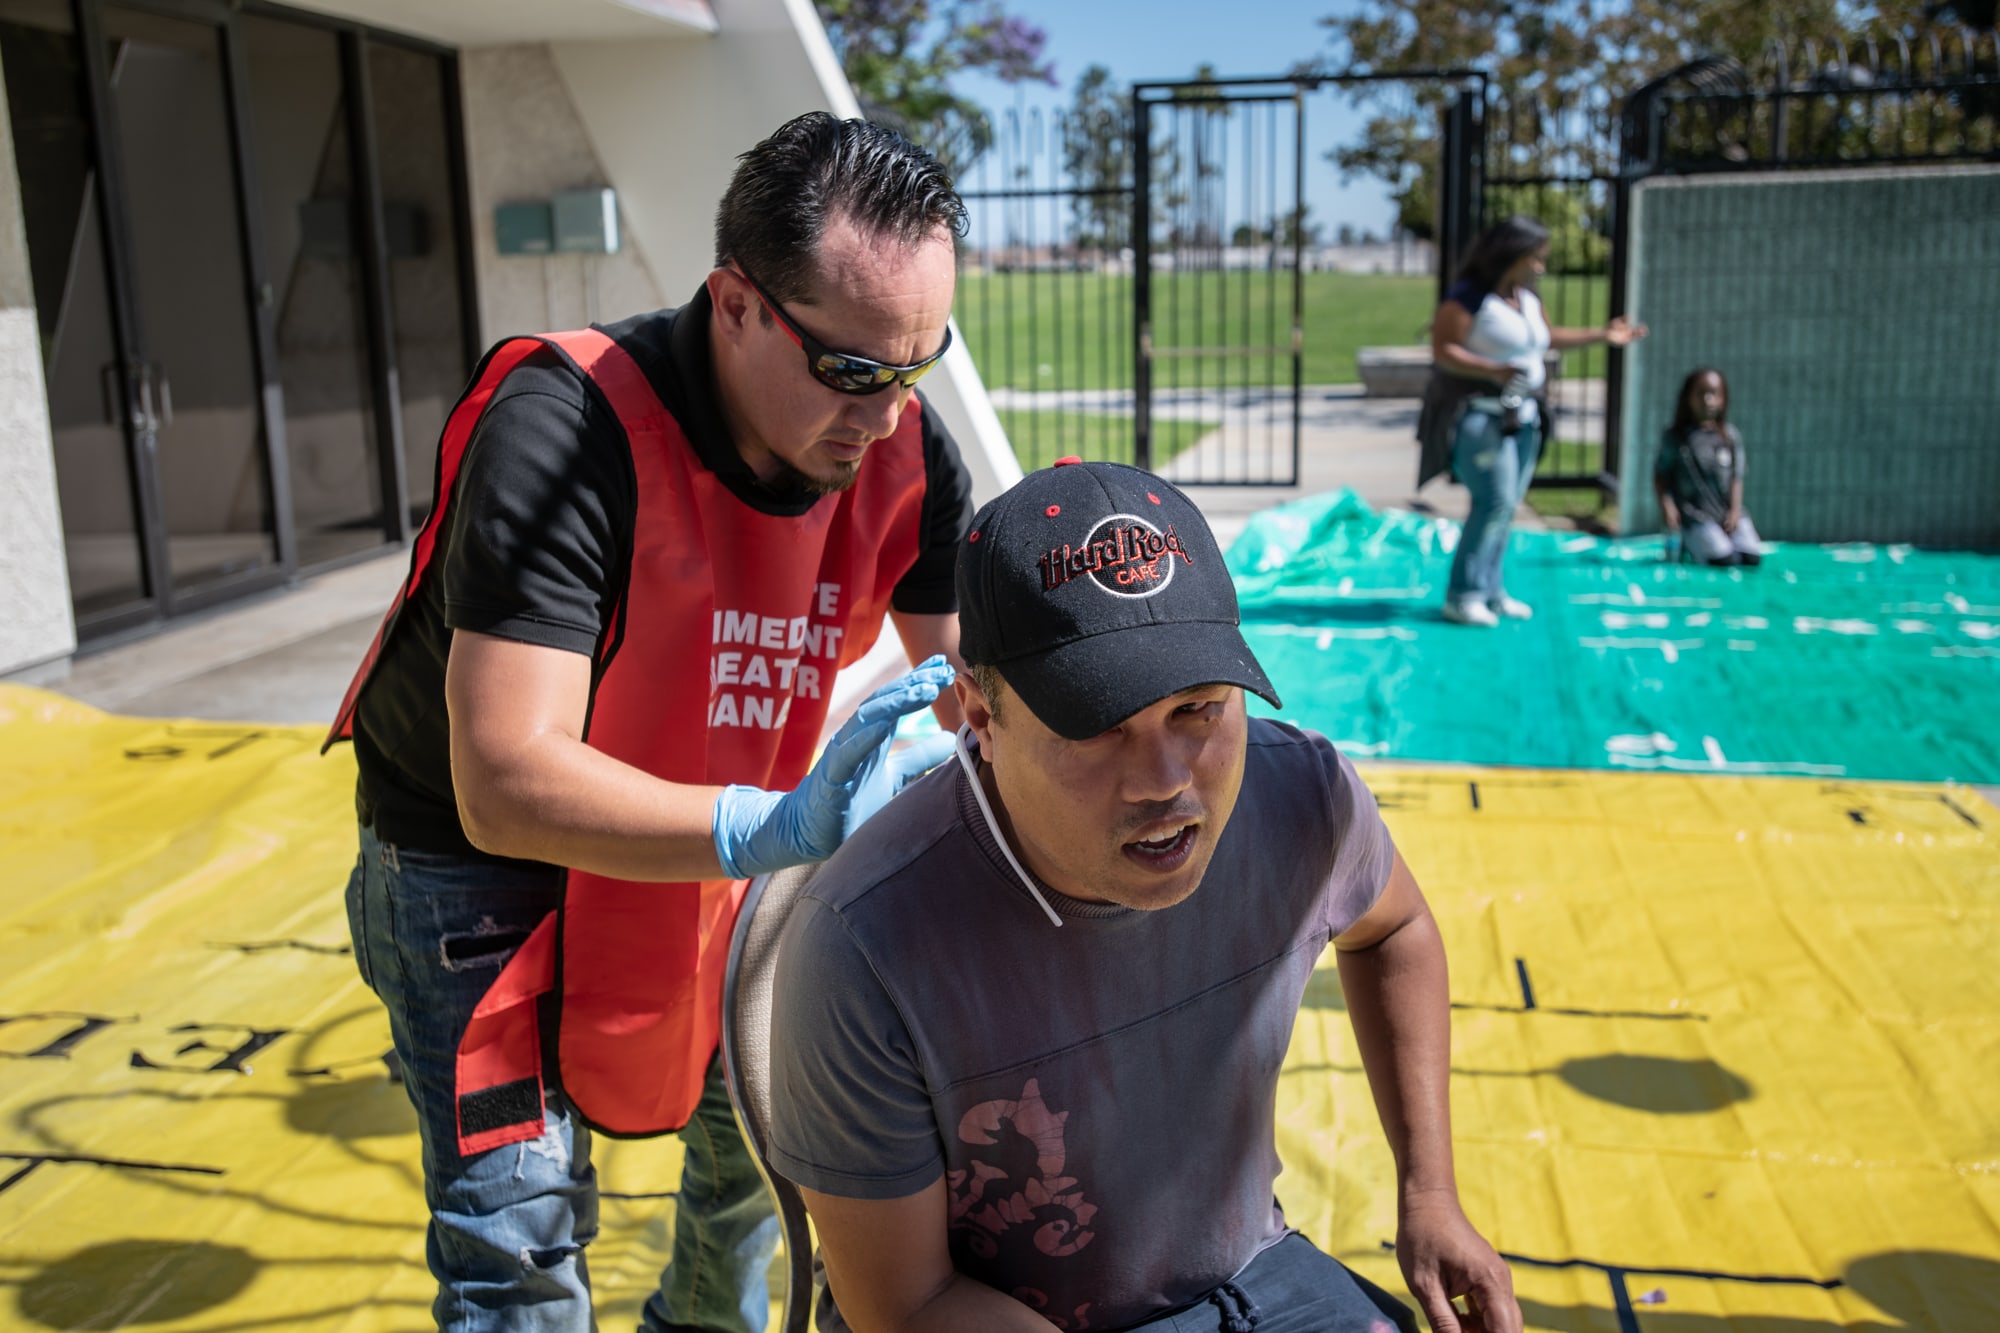 Ricardo Martinez (left) treats Derrick Kim for a simulated injury during  disaster training for their Community Emergency Response Team in Carson, California. (Brigette Waltermire/News21)